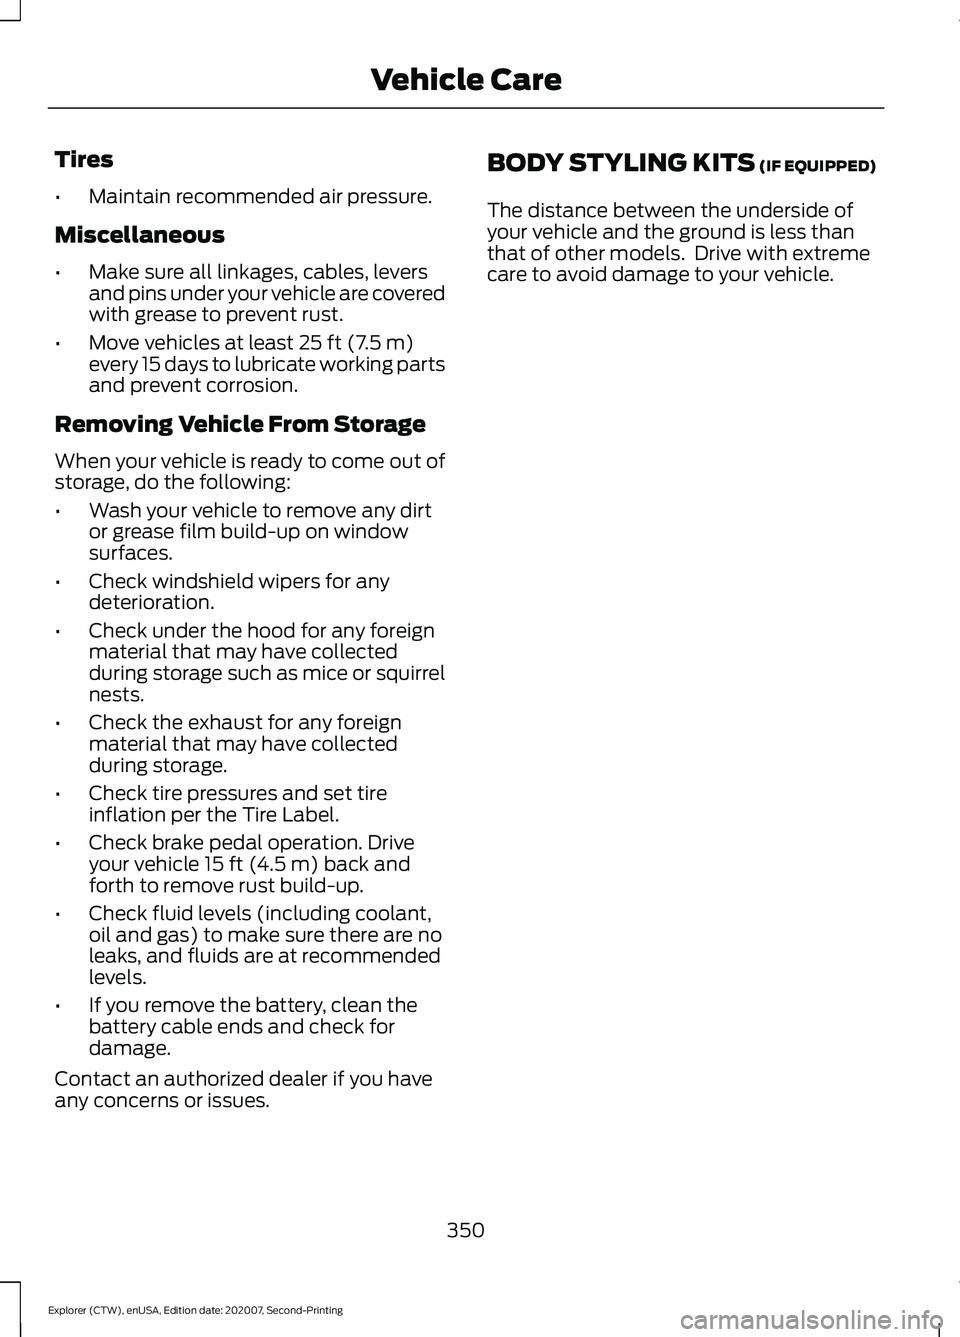 FORD EXPLORER 2021  Owners Manual Tires
•
Maintain recommended air pressure.
Miscellaneous
• Make sure all linkages, cables, levers
and pins under your vehicle are covered
with grease to prevent rust.
• Move vehicles at least 25